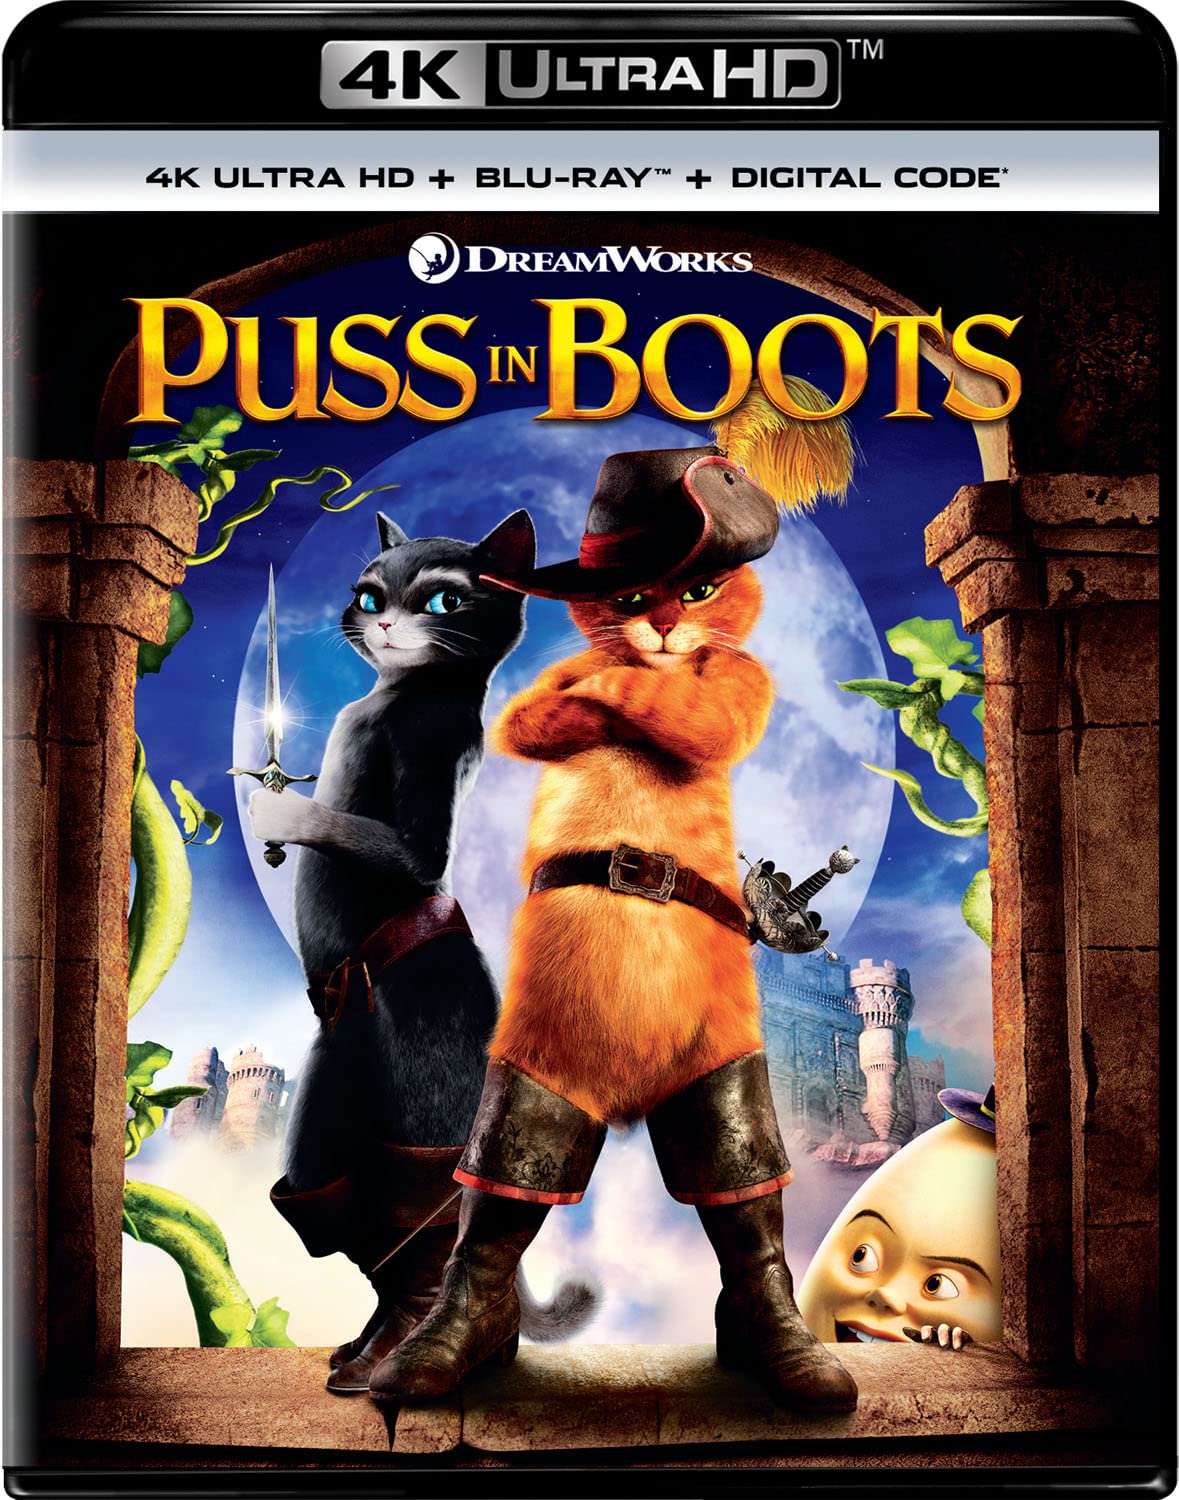 Puss in Boots 2011 4k Blu-ray